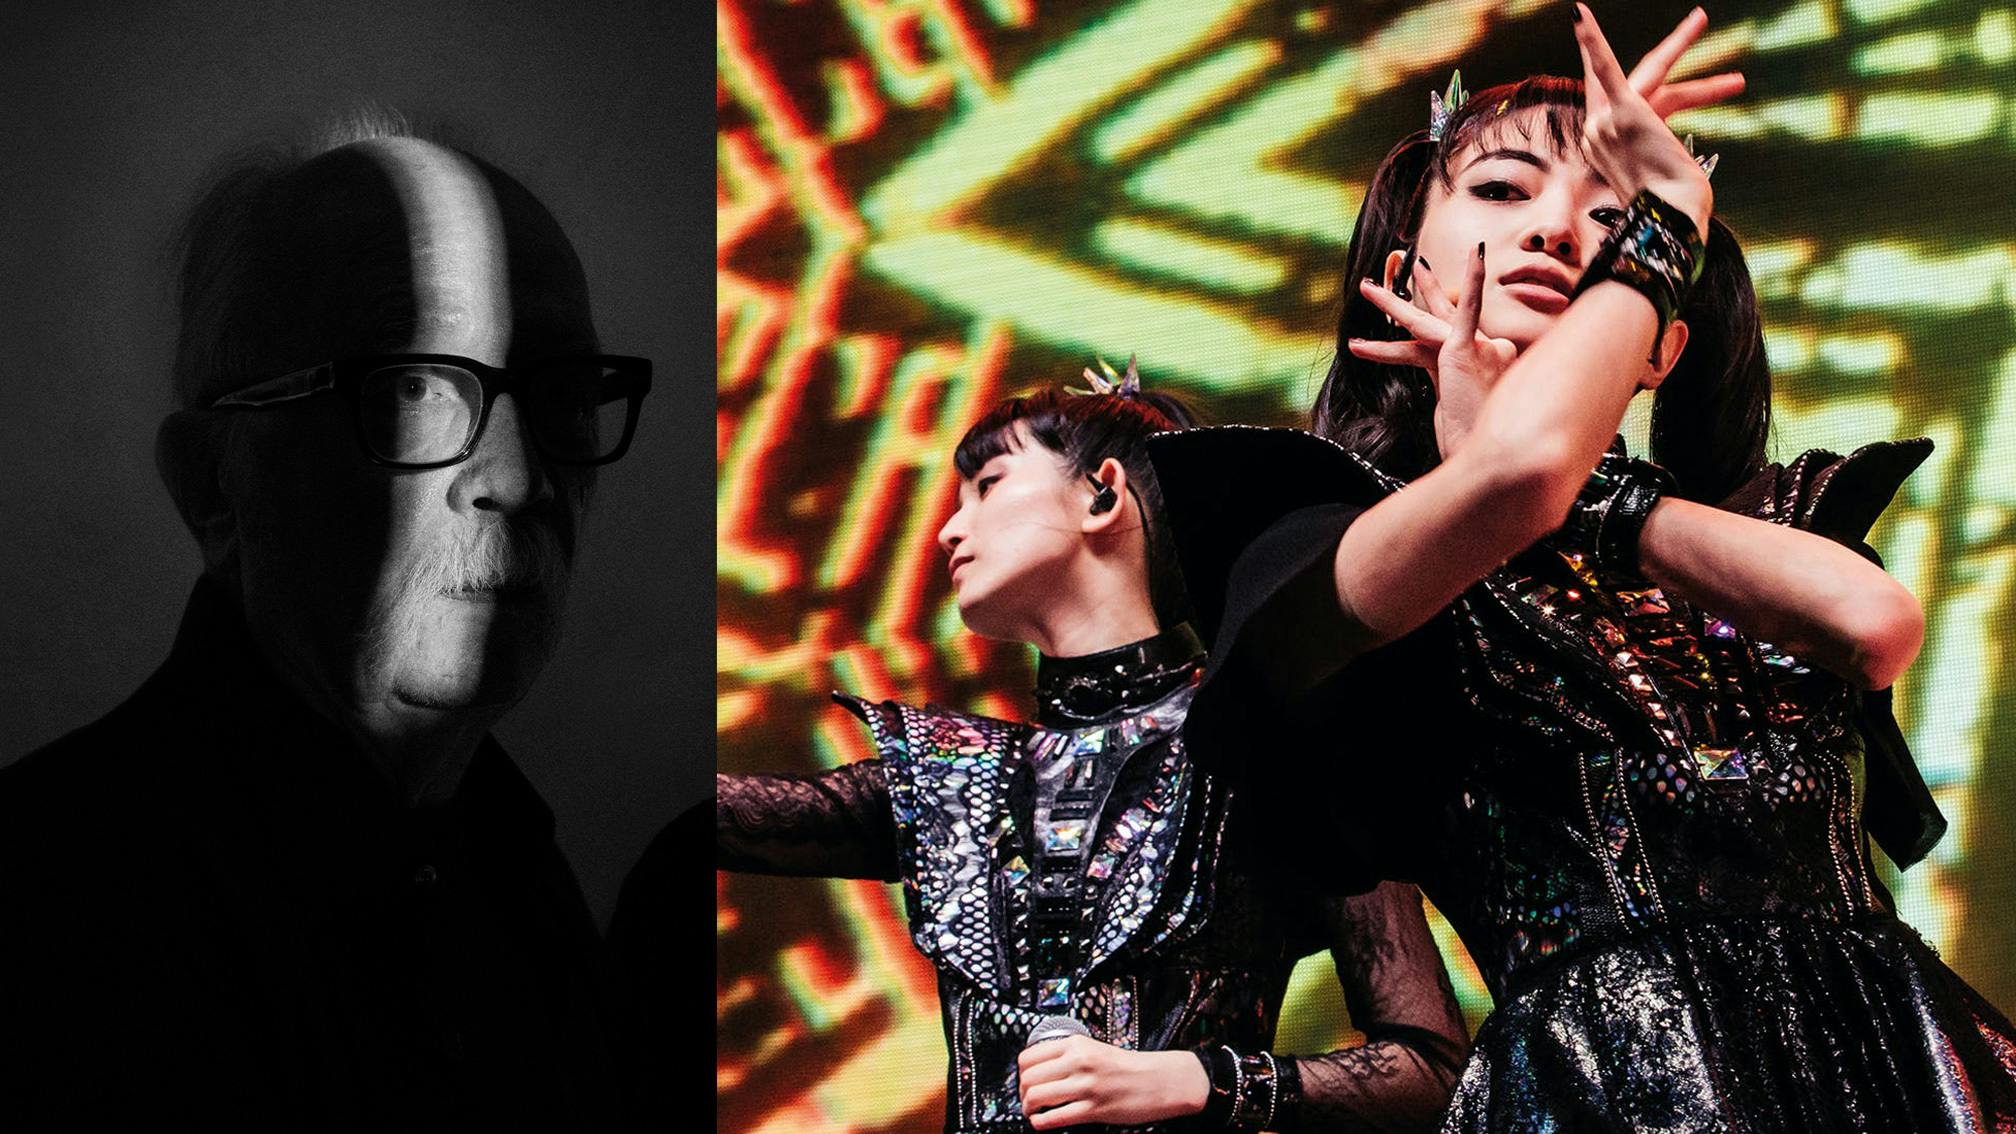 John Carpenter: My life will be complete if I get endorsed by BABYMETAL